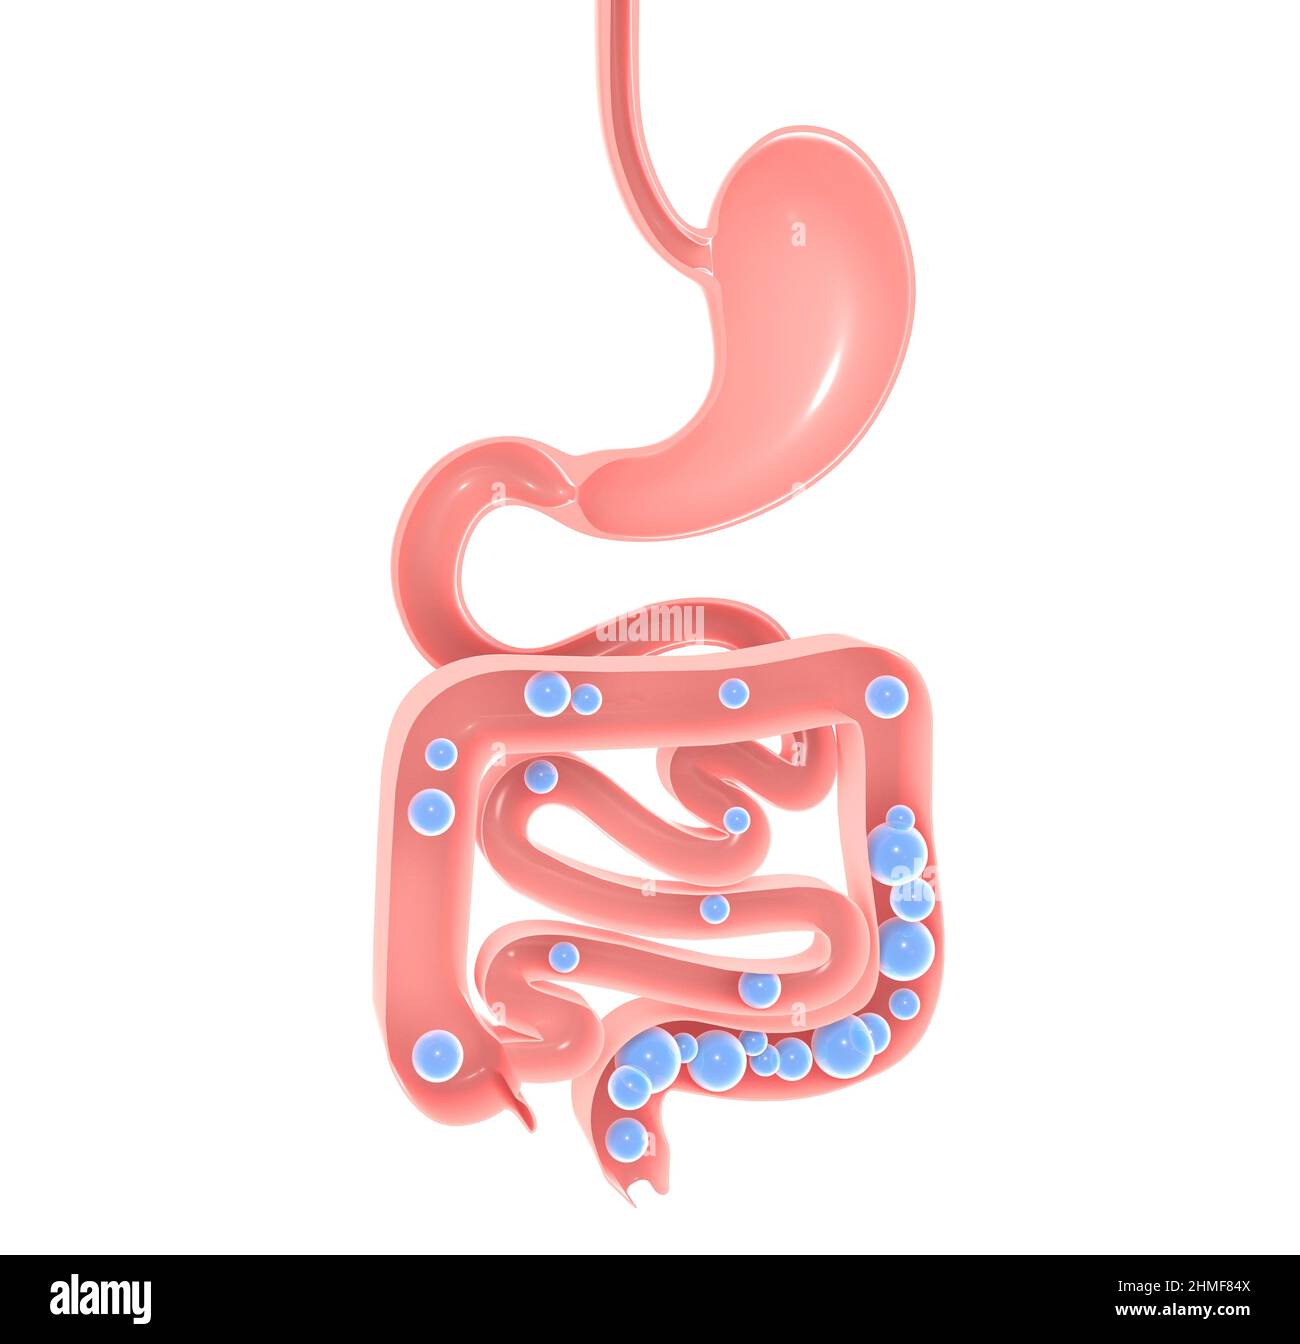 Anatomical 3d illustration of the digestive system. Stomach, large and small intestine with gases. Showing the open interior. Aerophagia. Stock Photo